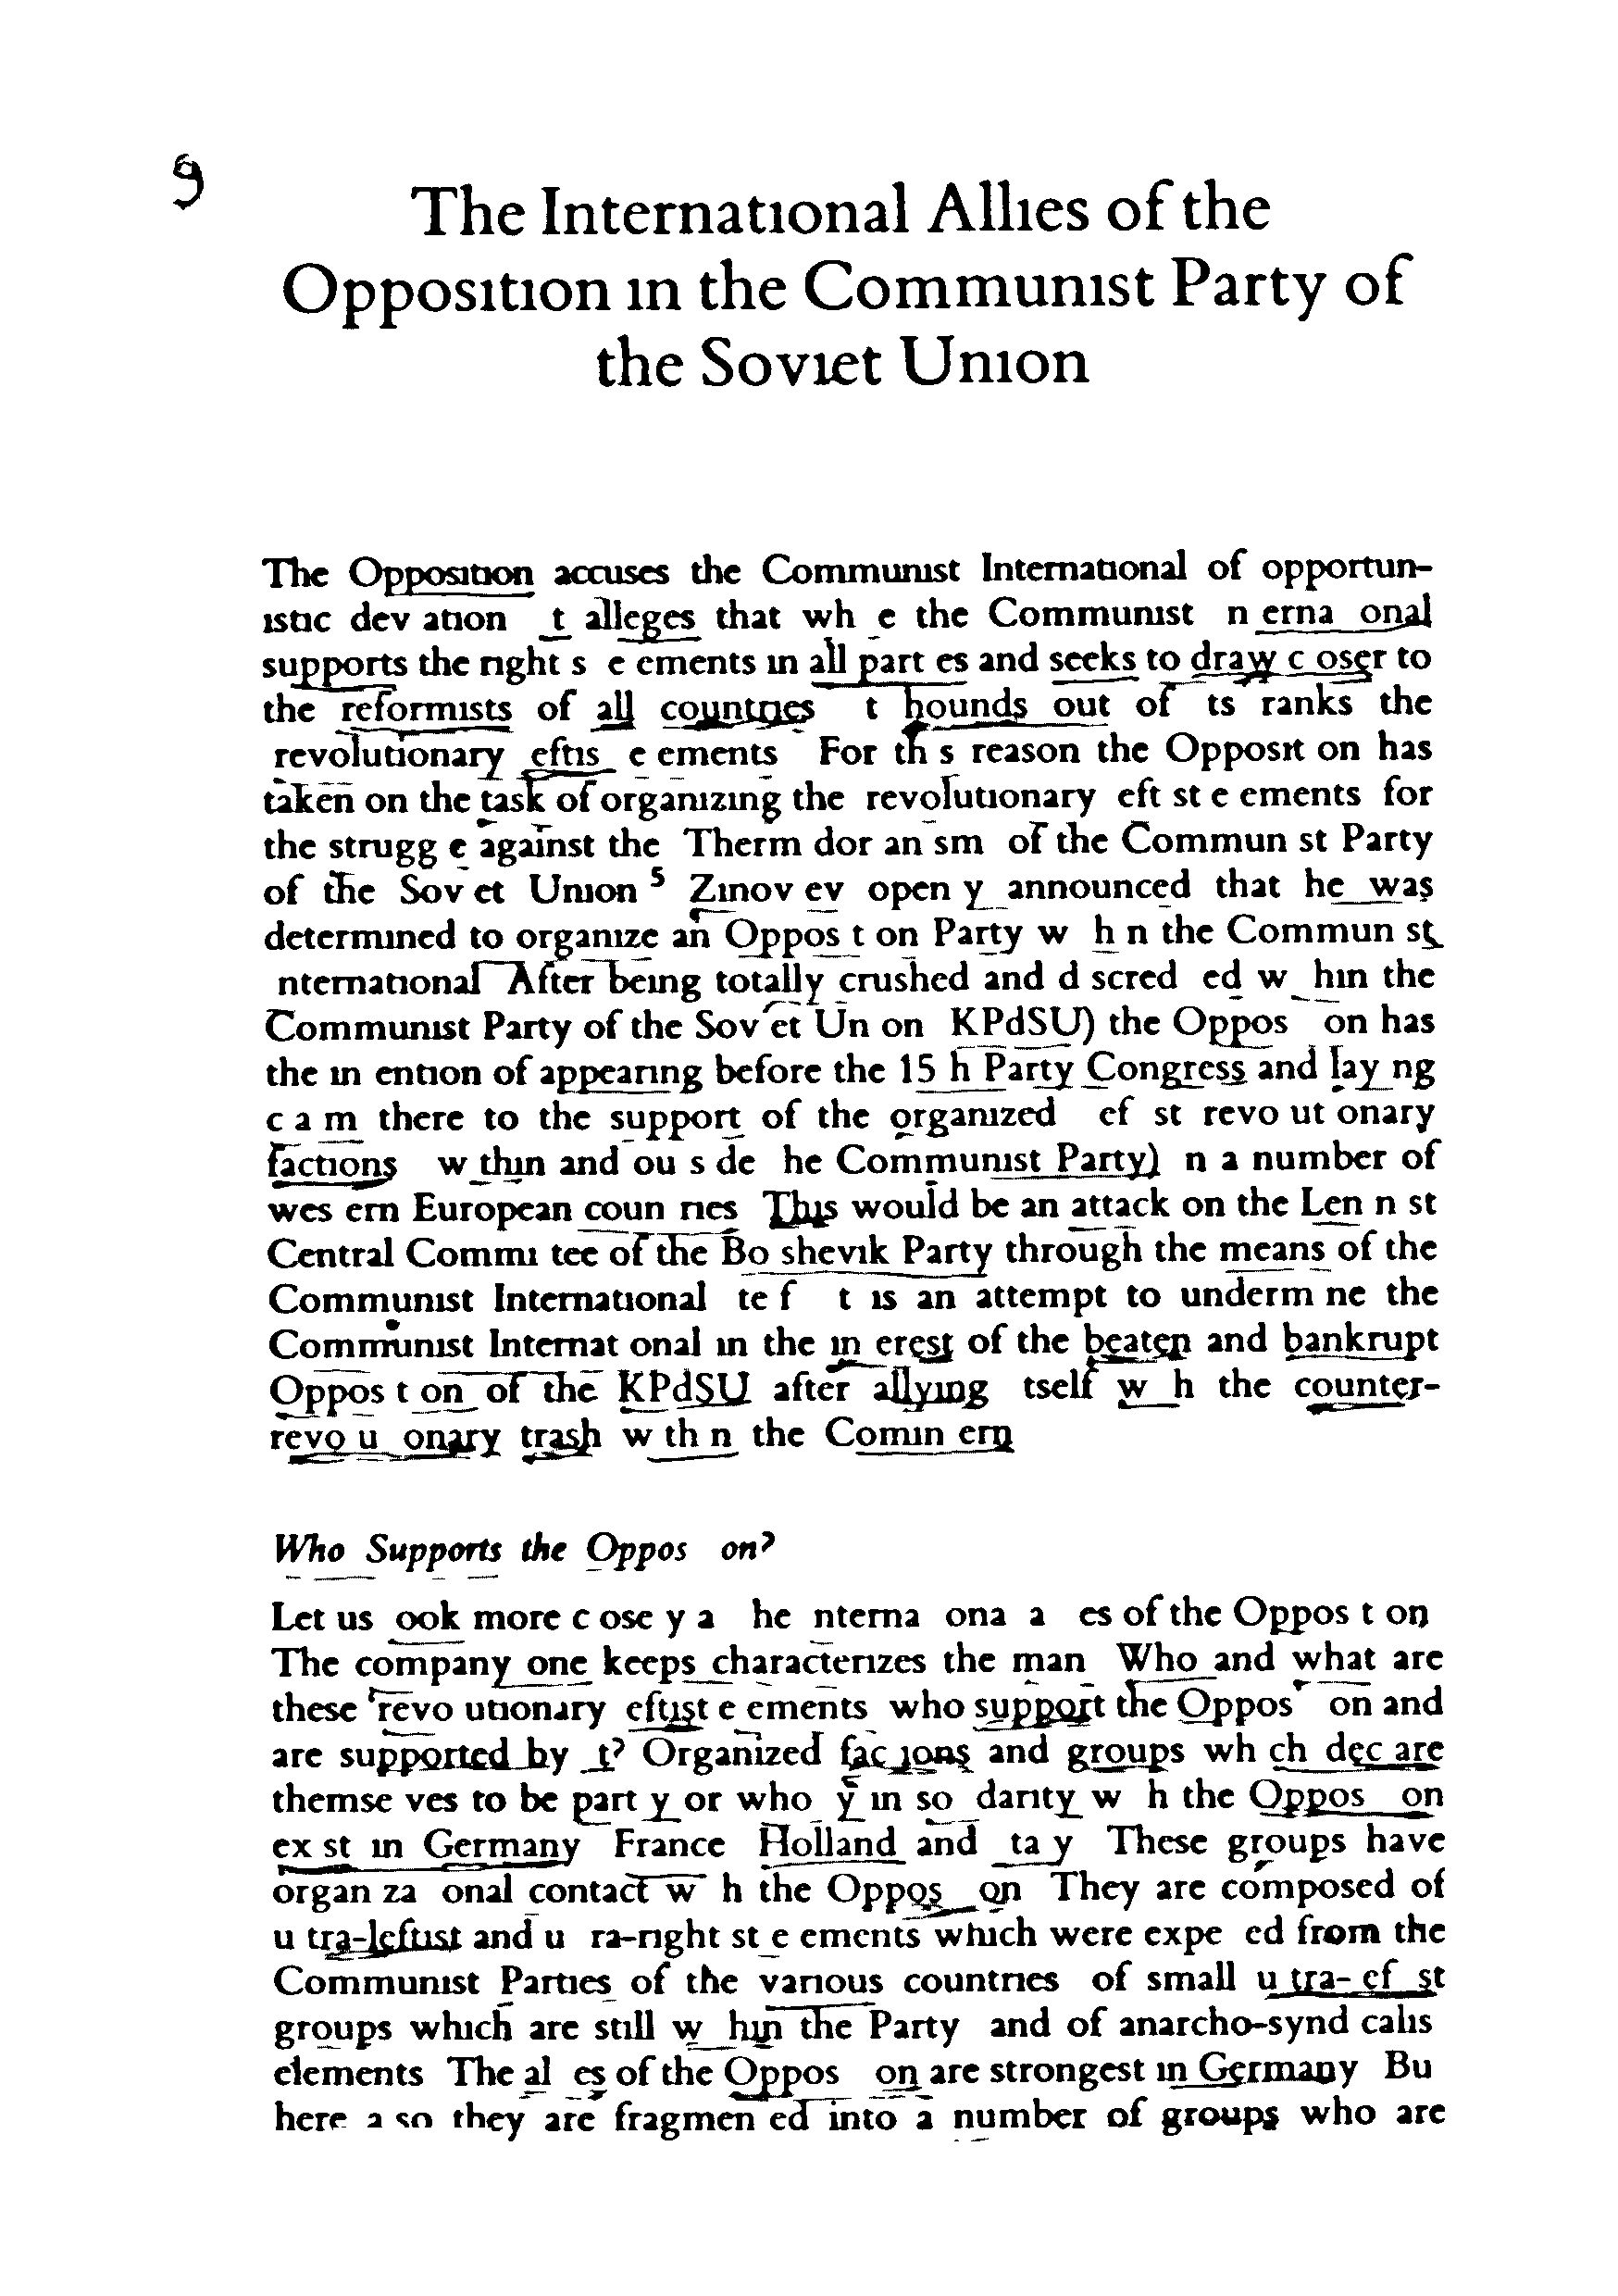 The International allies of the Opposition in the Communist party of the Soviet Union